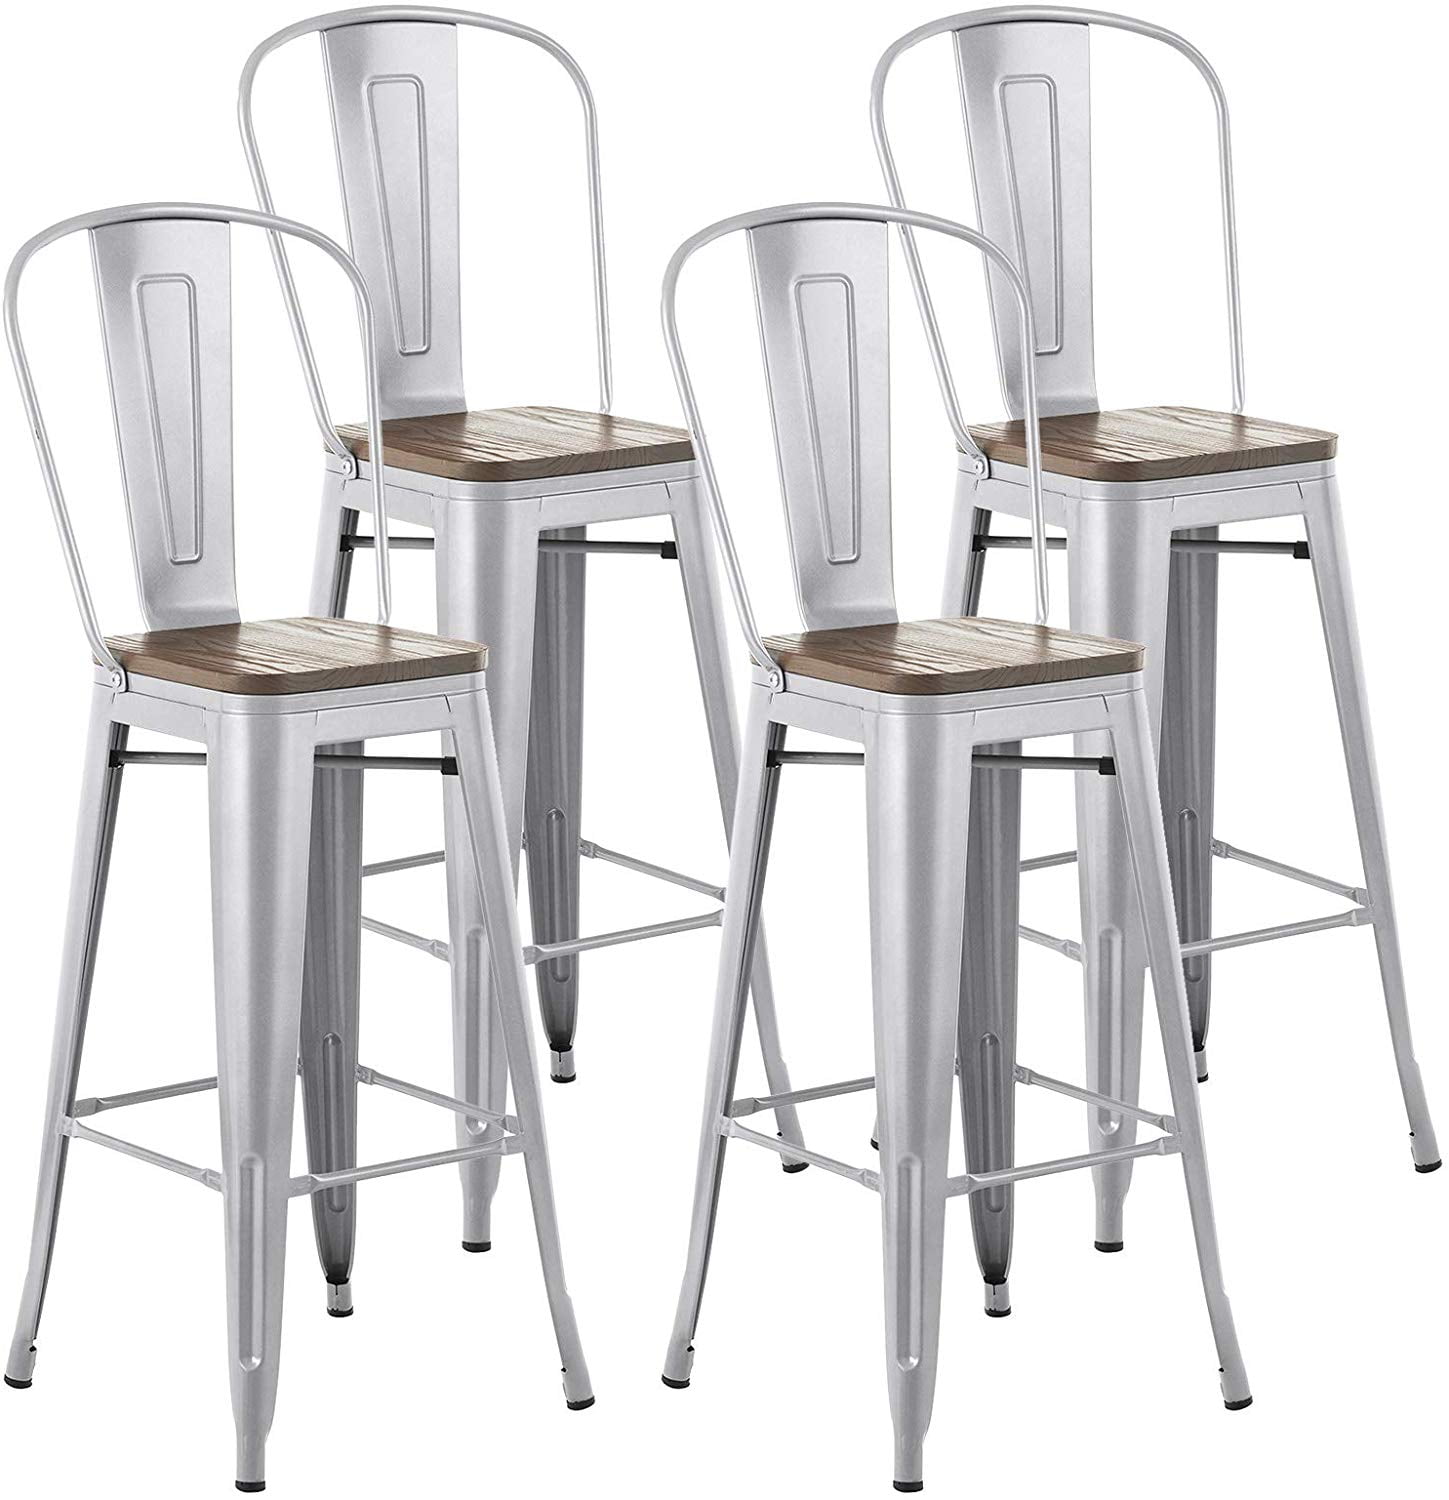 Mecor Bar Stool Silver Set Of 4, 30 Inch Bar Stools With Back